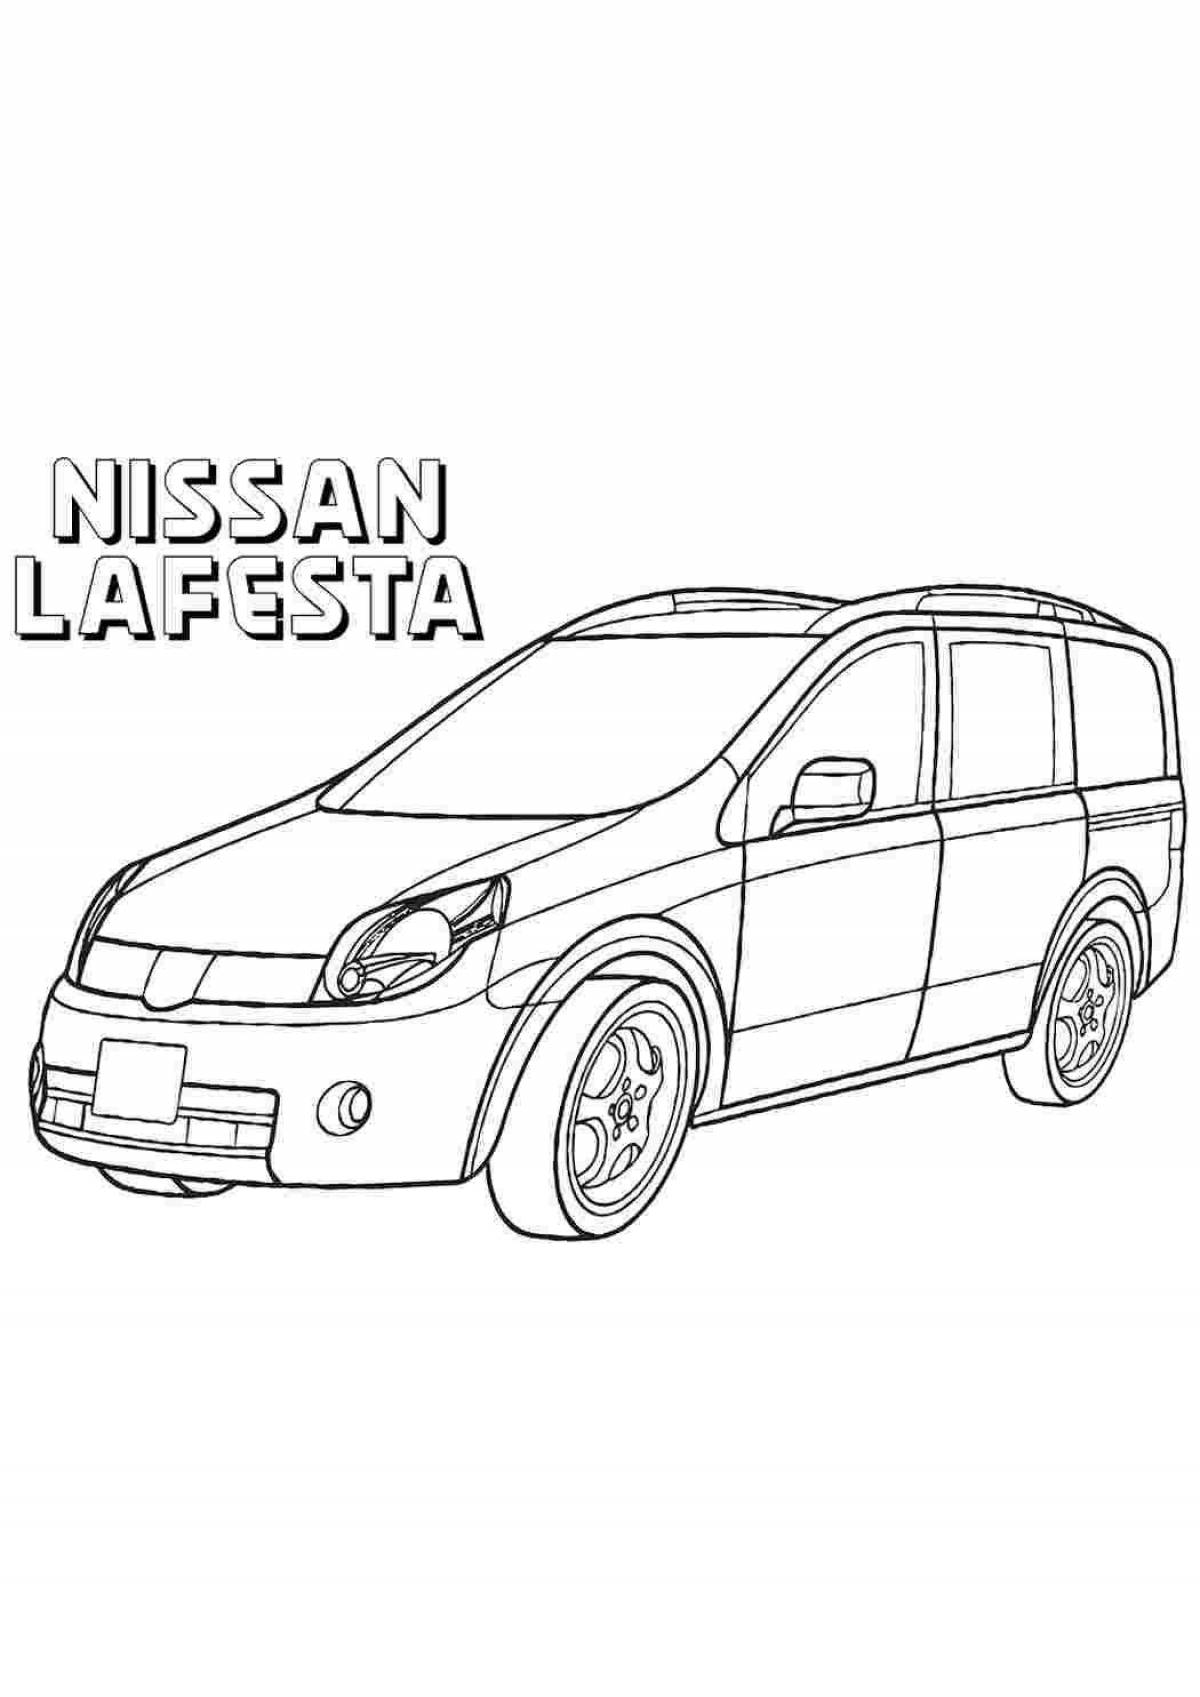 Grand nissan pathfinder coloring page